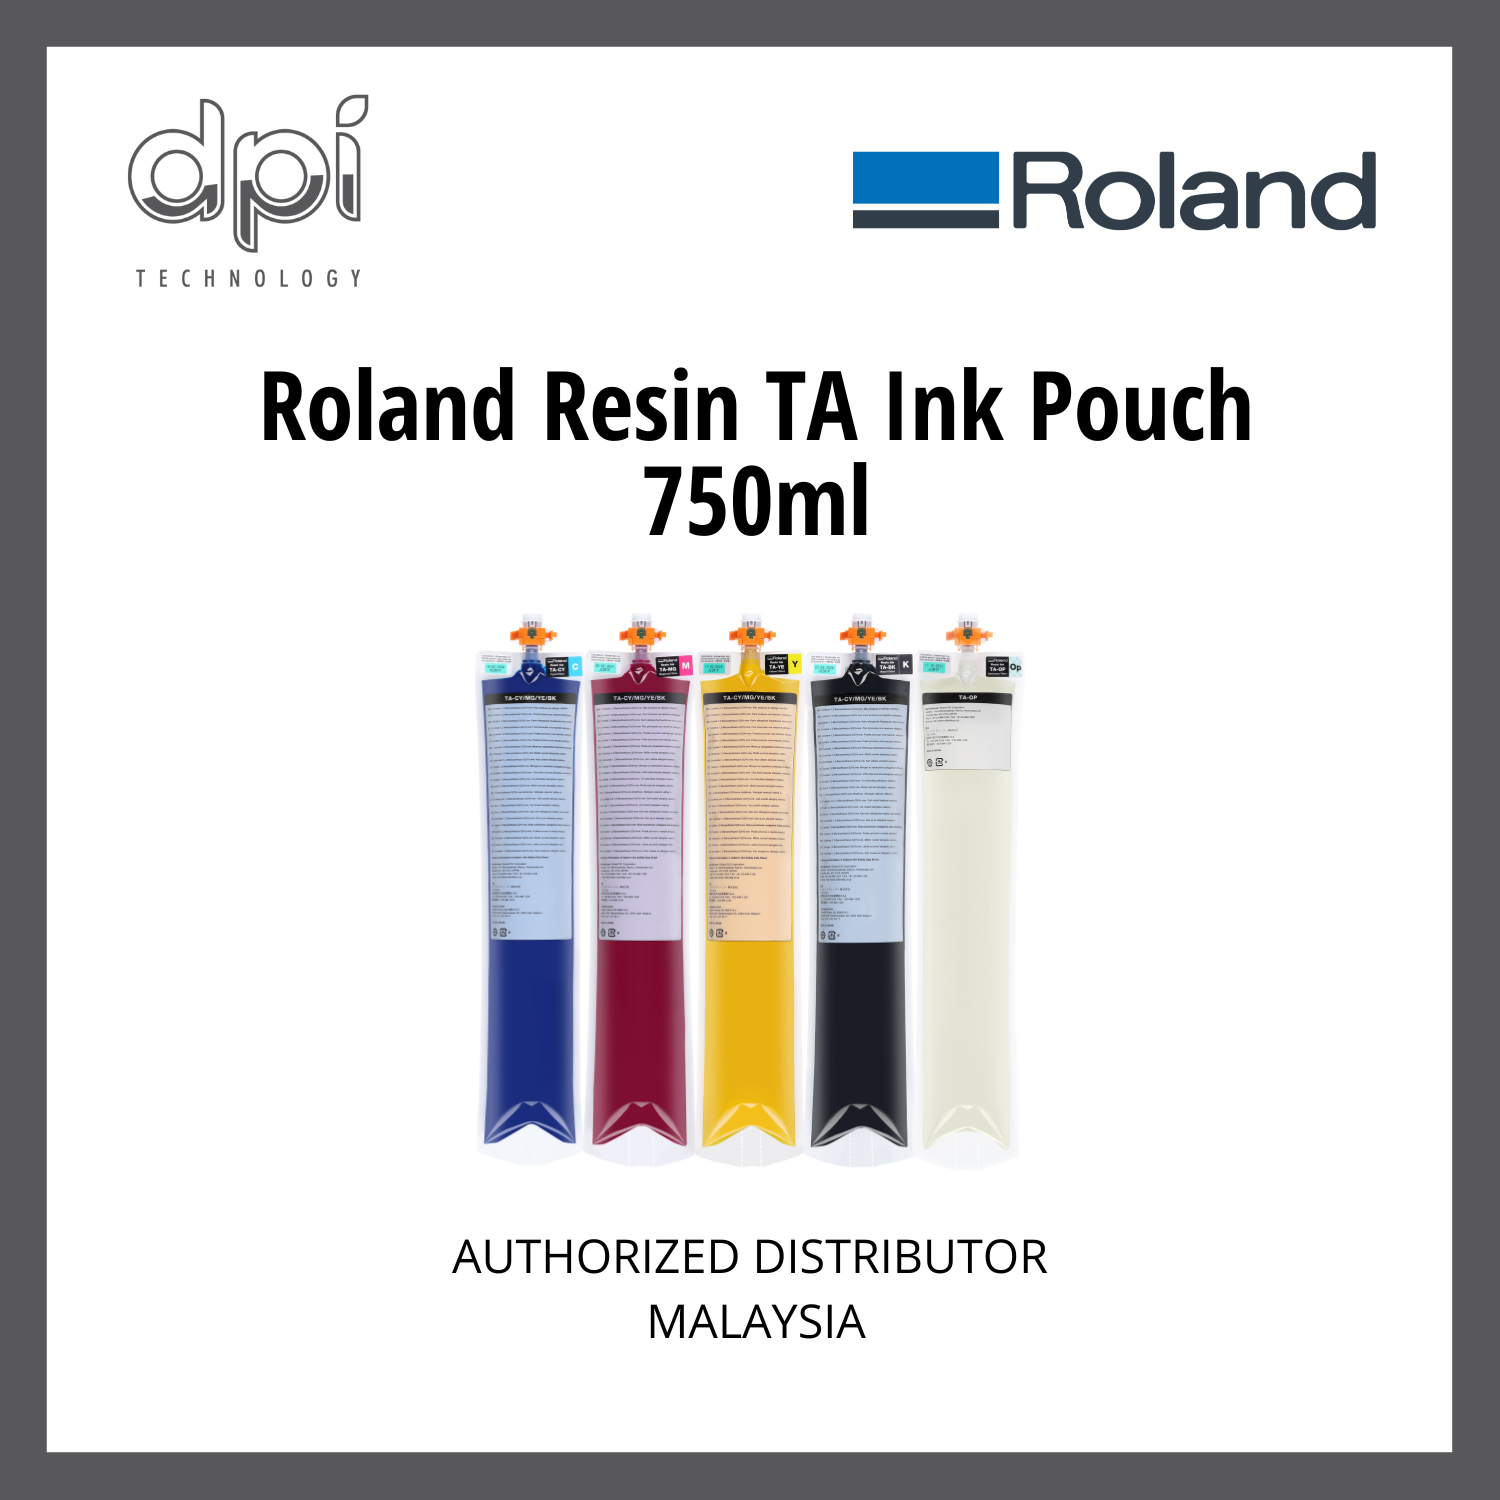 Roland Resin TA Ink Pouch